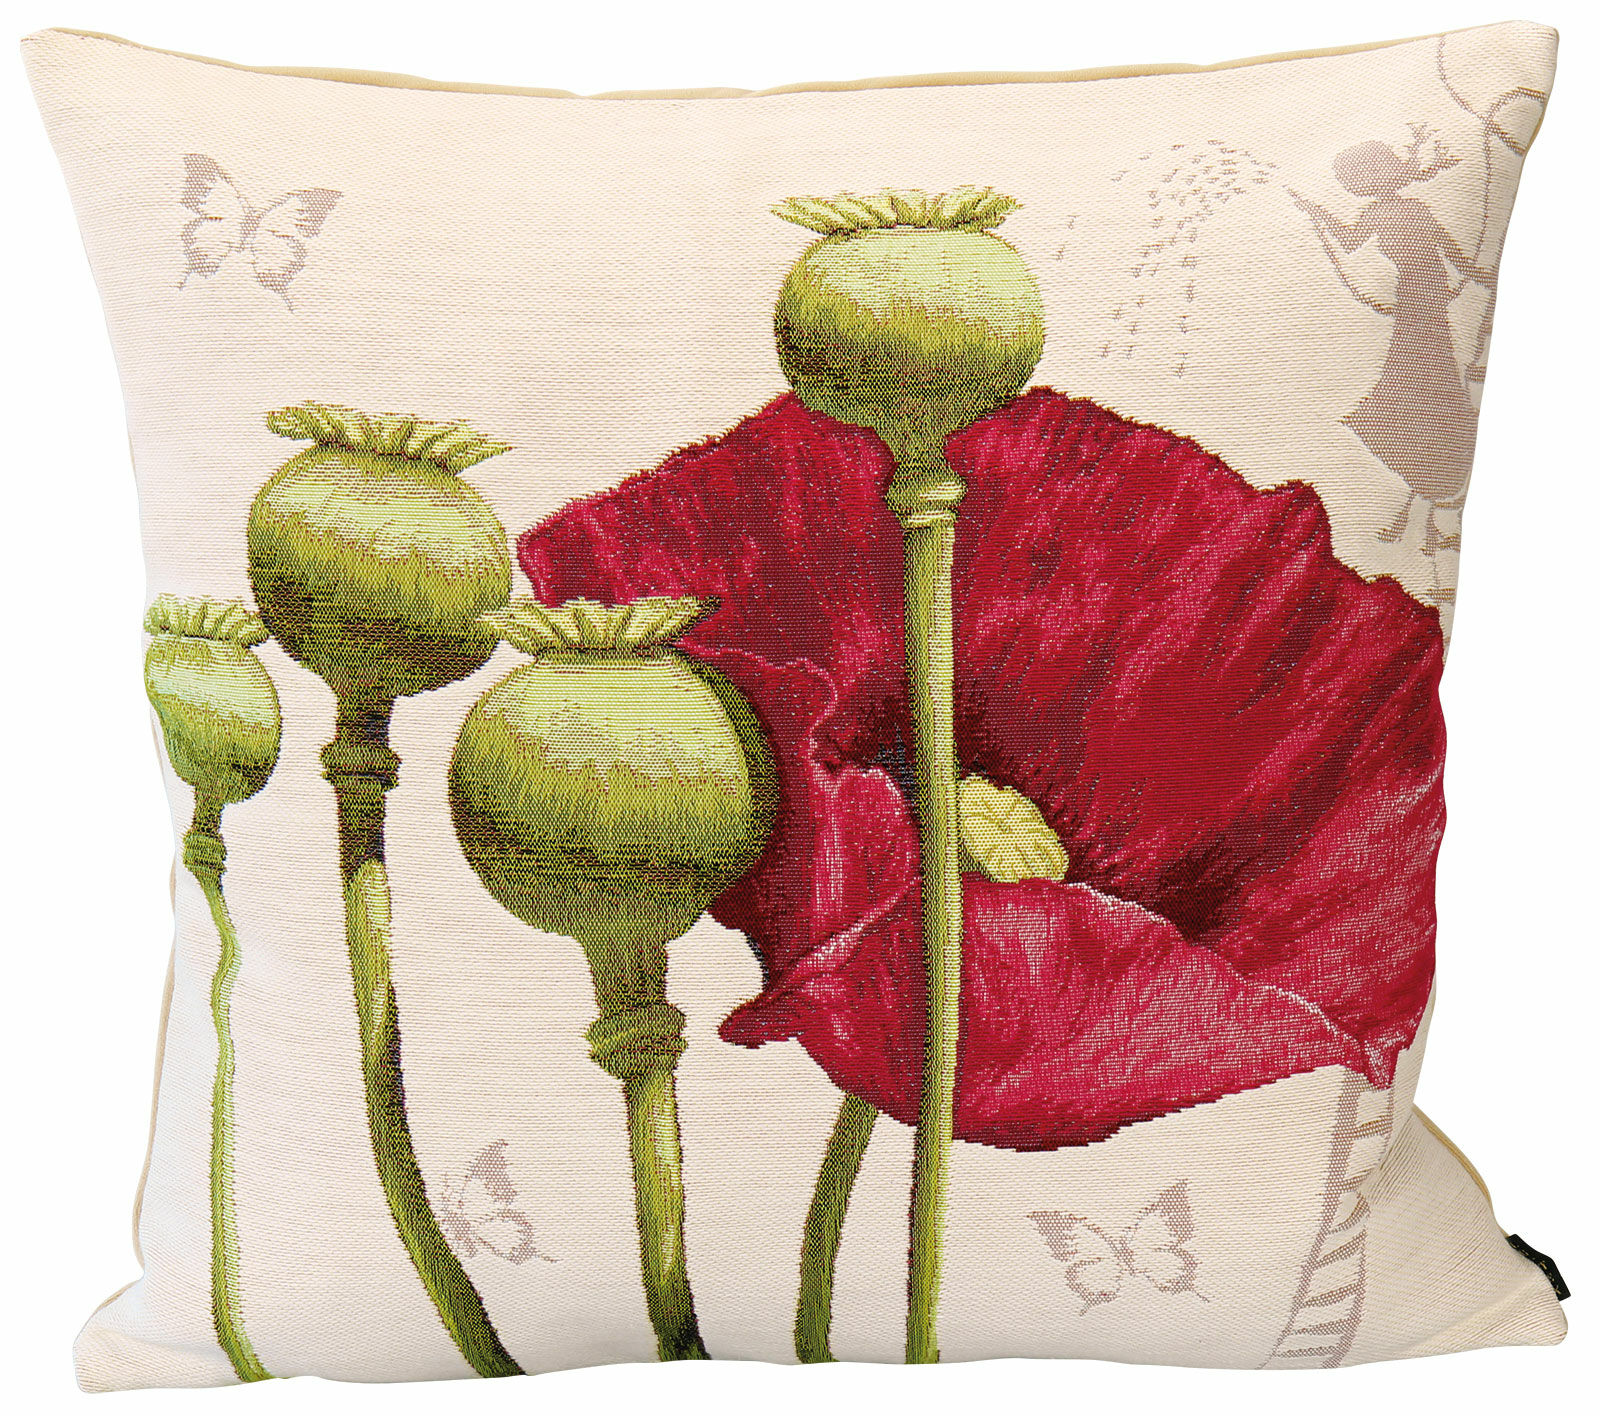 Cushion cover "Poppies I"